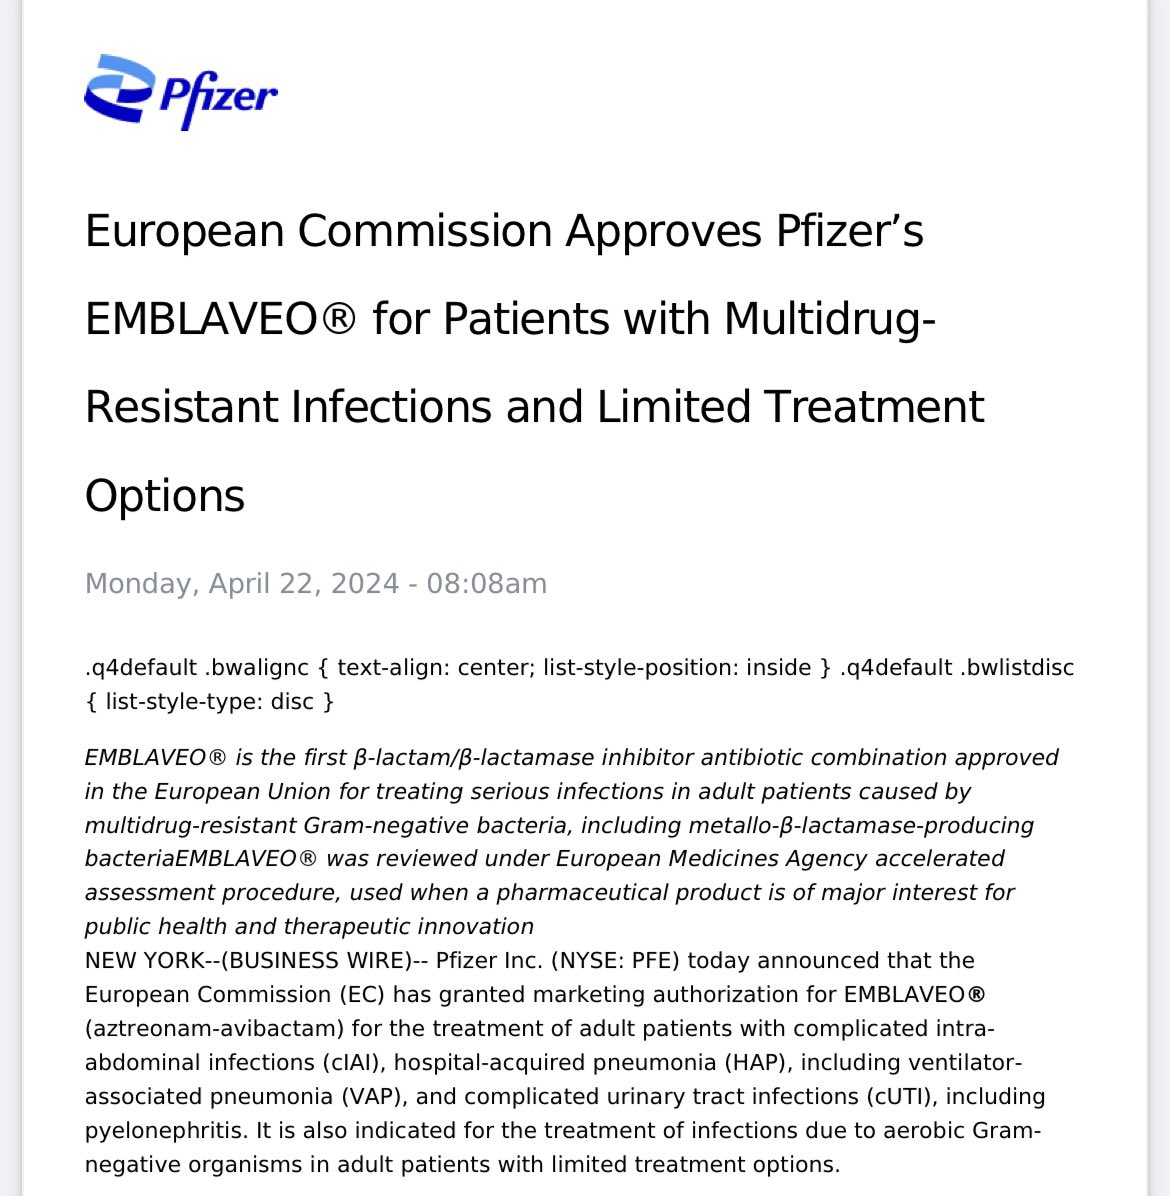 In all of Monday’s madness, the European Commission approved Pfizer’s EMBLAVEO (aztreonam and avibactam combo) 💉 #IDtwitter #MedTwitter pfizer.com/news/press-rel…